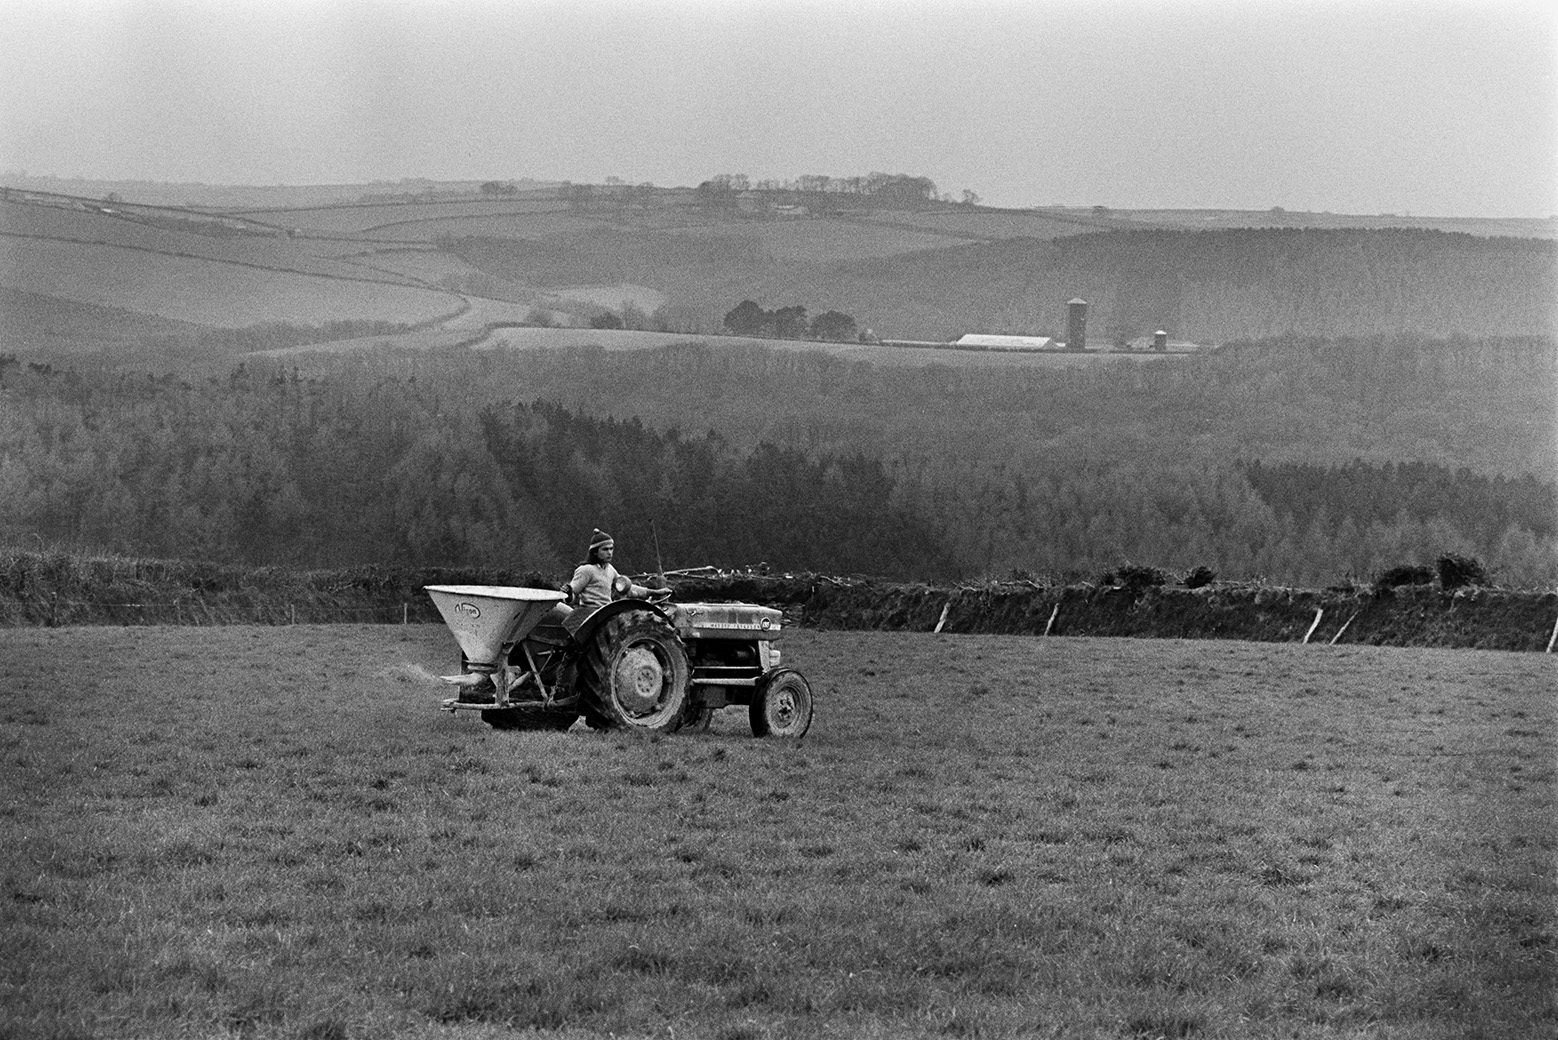 Derek Bright spreading fertilizer on a field at Mill Road Farm, Beaford using a tractor and fertilizer spreader. A landscape of fields, woodland and hedgerows can be seen in the background. The farm was also known as Jeffrys.